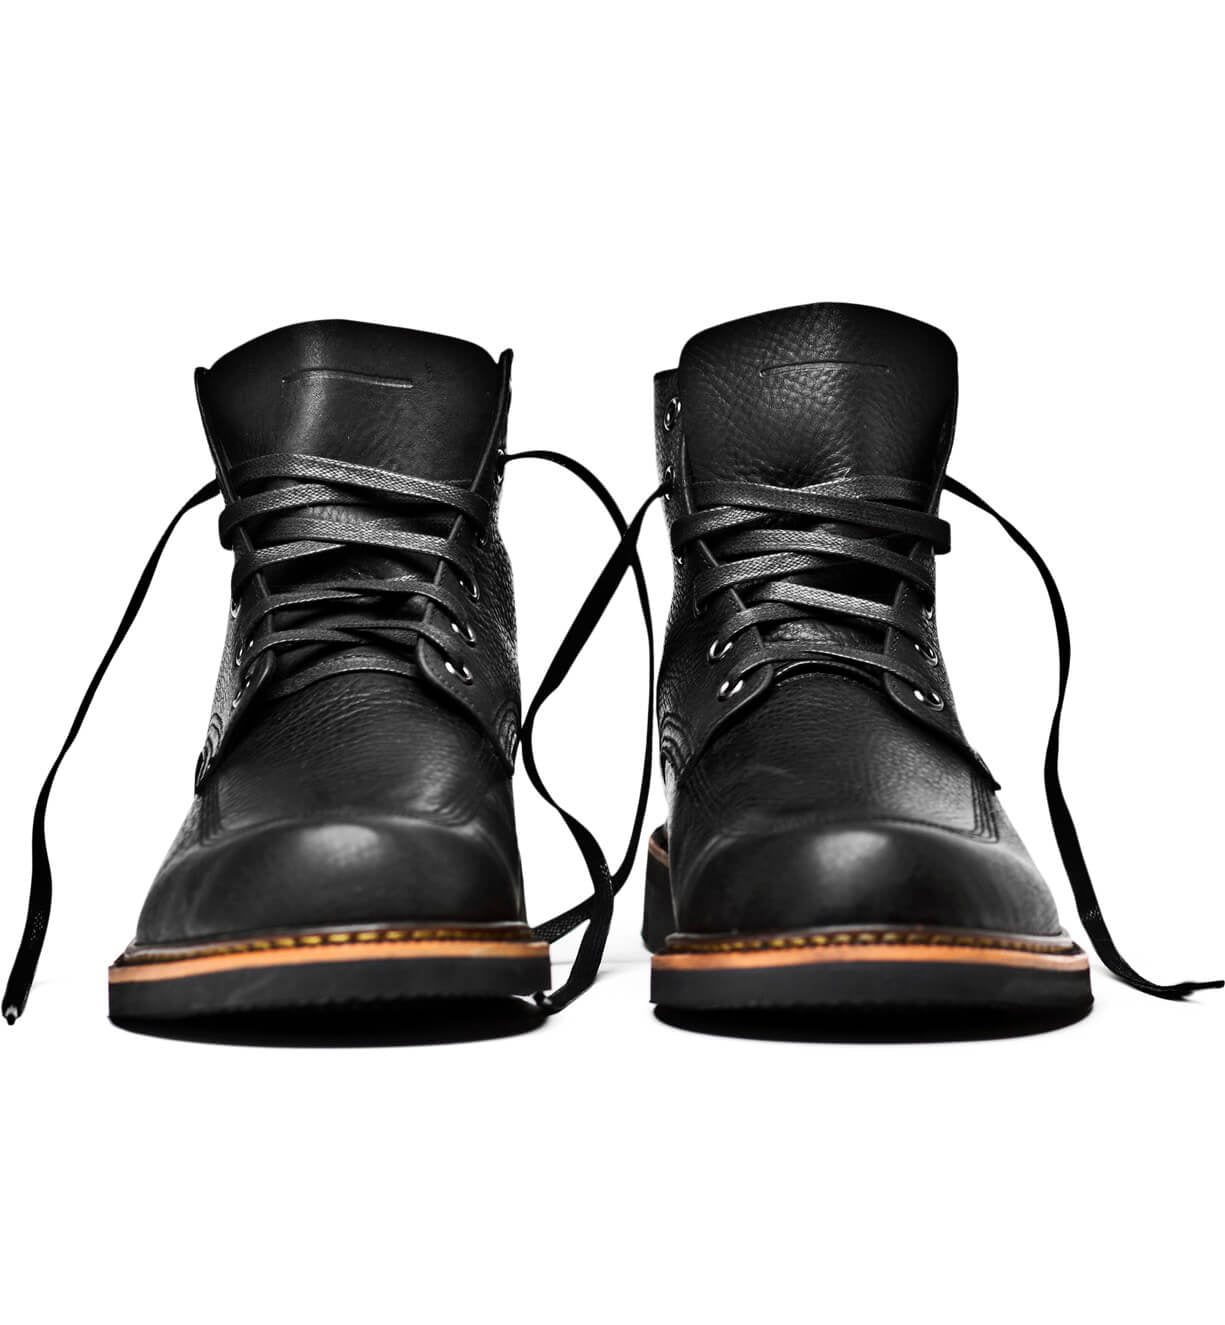 A pair of comfortable black leather Davis boots on a white background, from the Broken Homme brand.